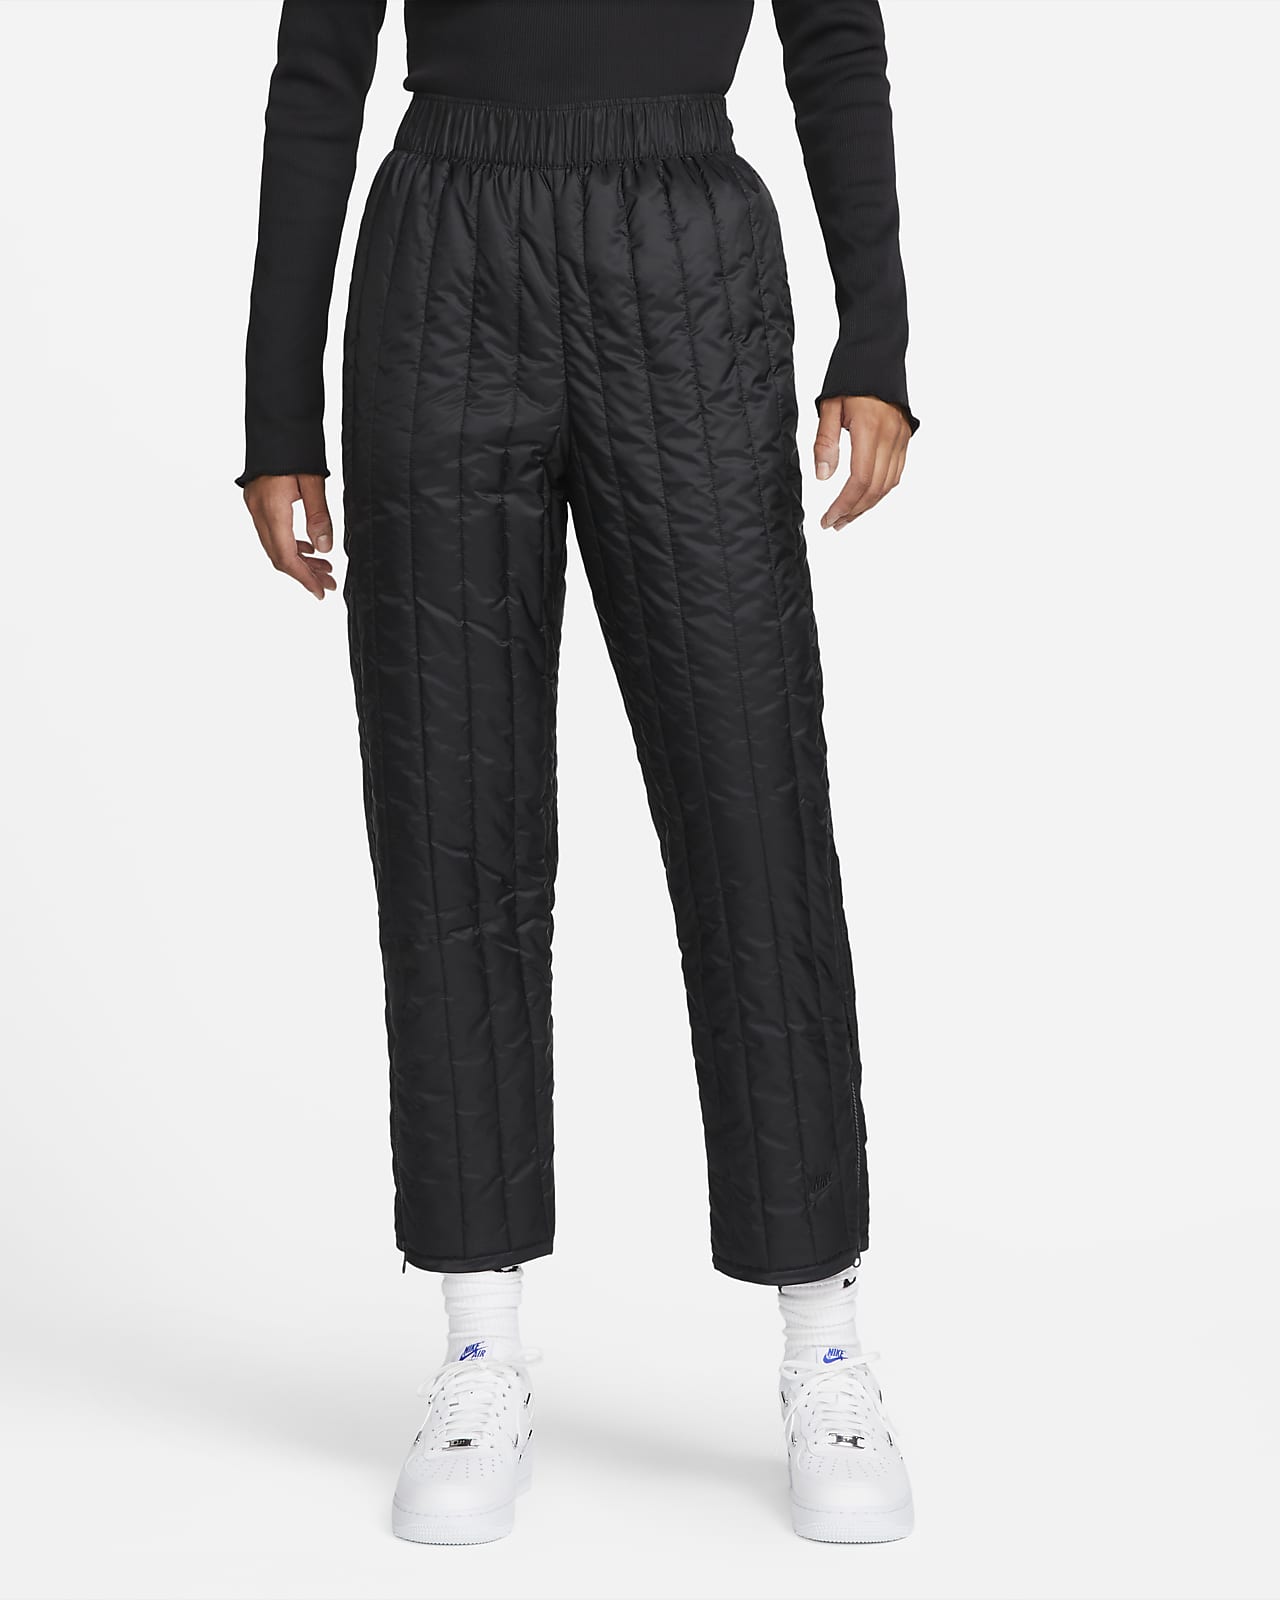 https://static.nike.com/a/images/t_PDP_1280_v1/f_auto,q_auto:eco/75f56fa8-d247-440c-a17b-23ec366fc54d/sportswear-tech-pack-high-waisted-trousers-lqBhK1.png